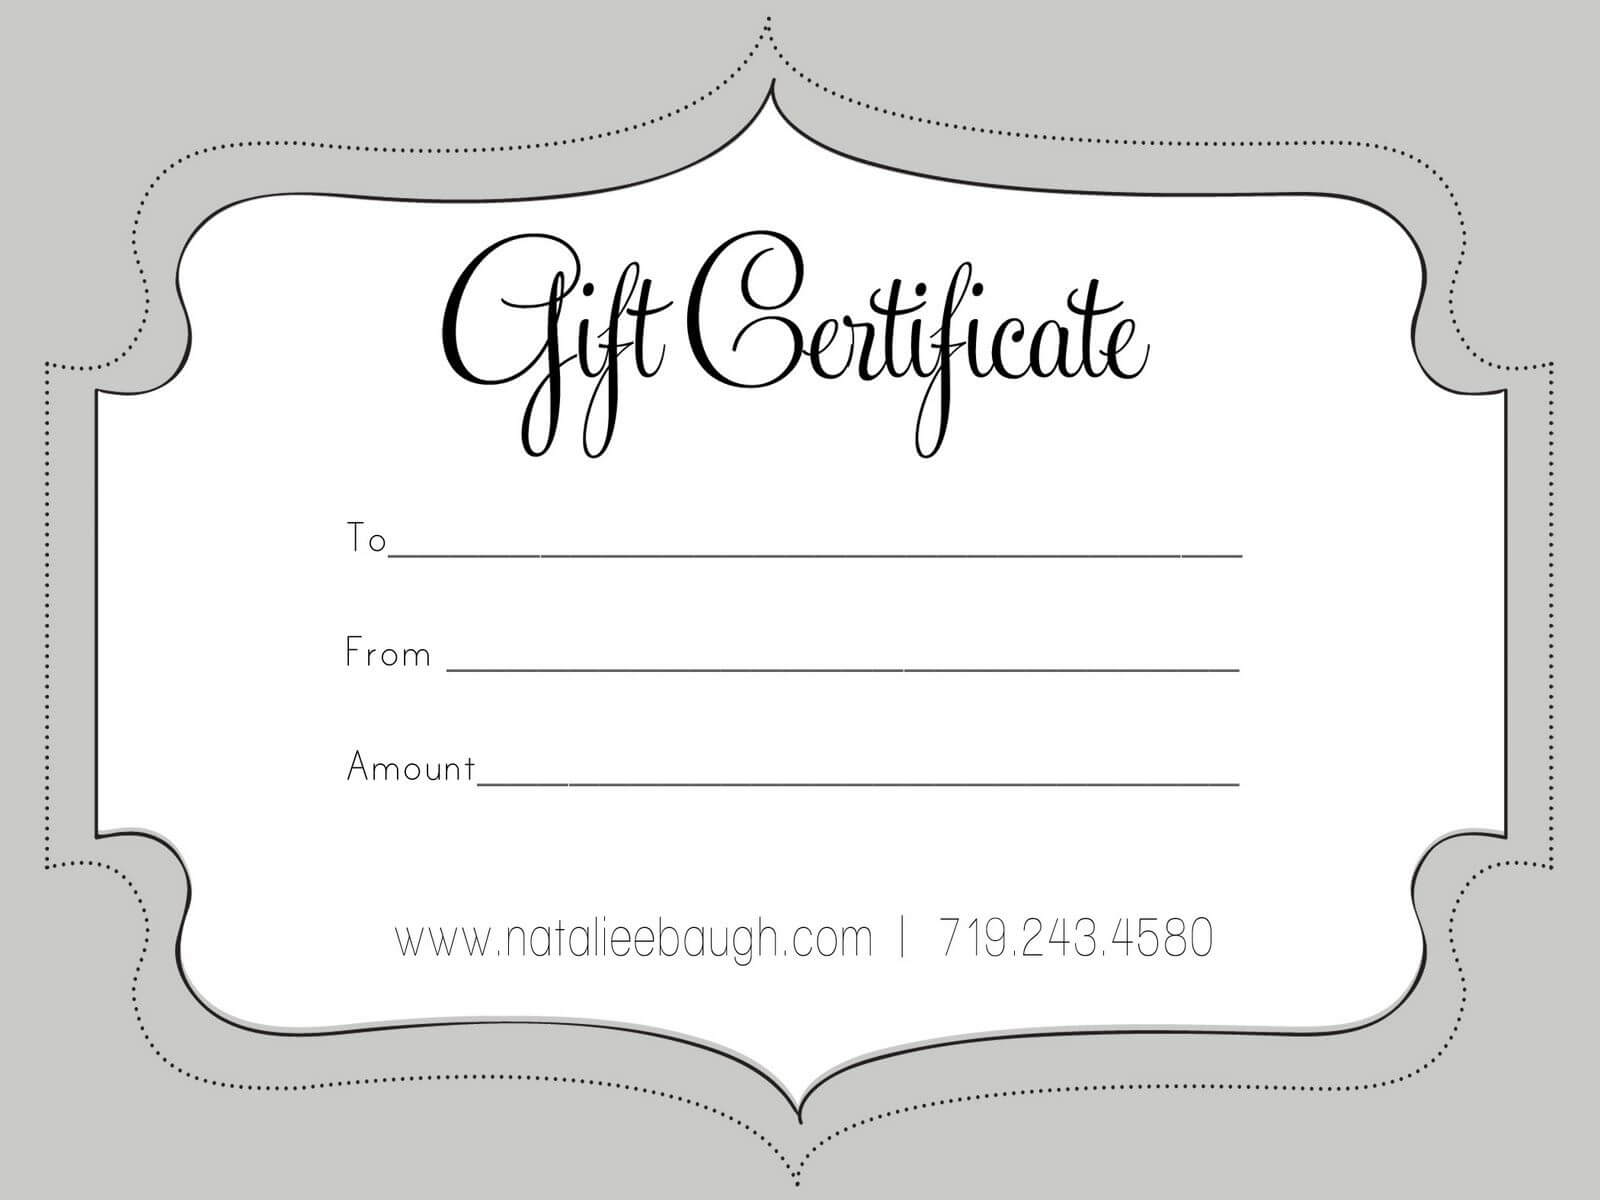 A Cute Looking Gift Certificate | S P A | Gift Certificate Regarding Present Certificate Templates